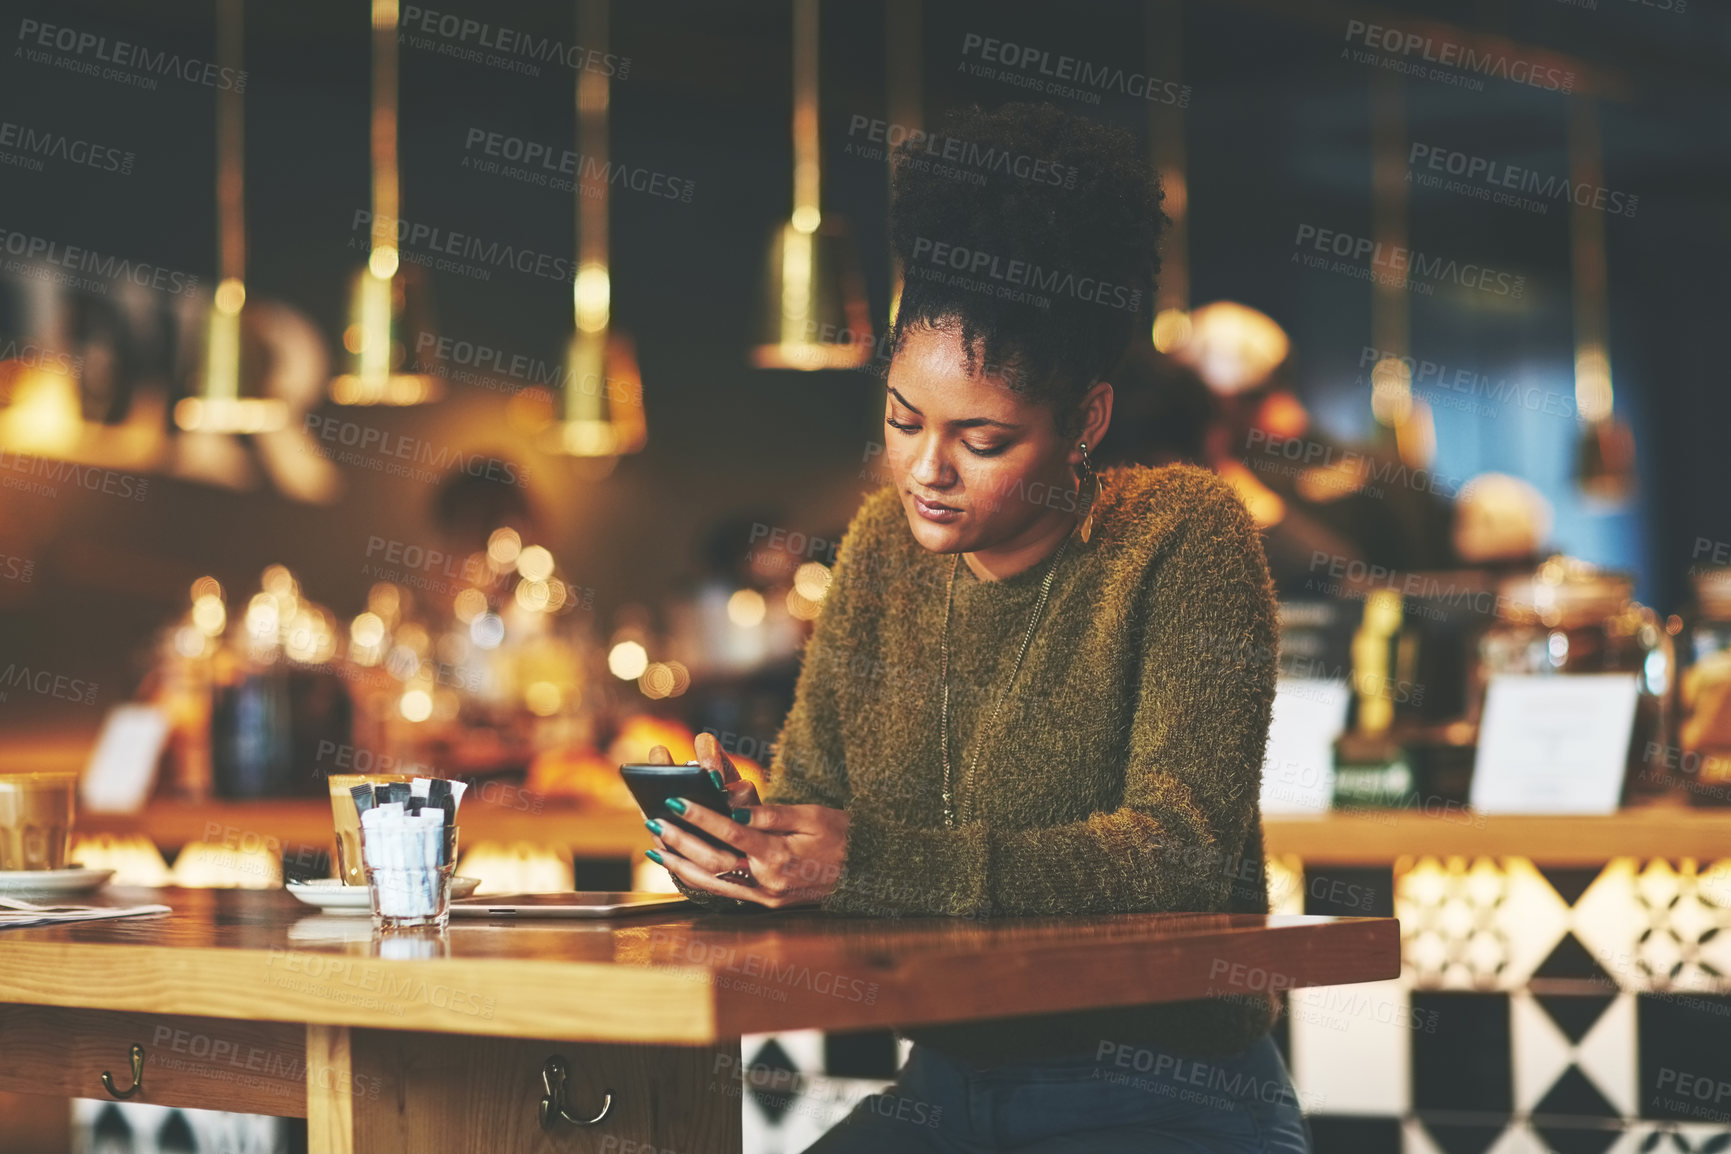 Buy stock photo Shot of a young woman using a mobile phone at a coffee shop